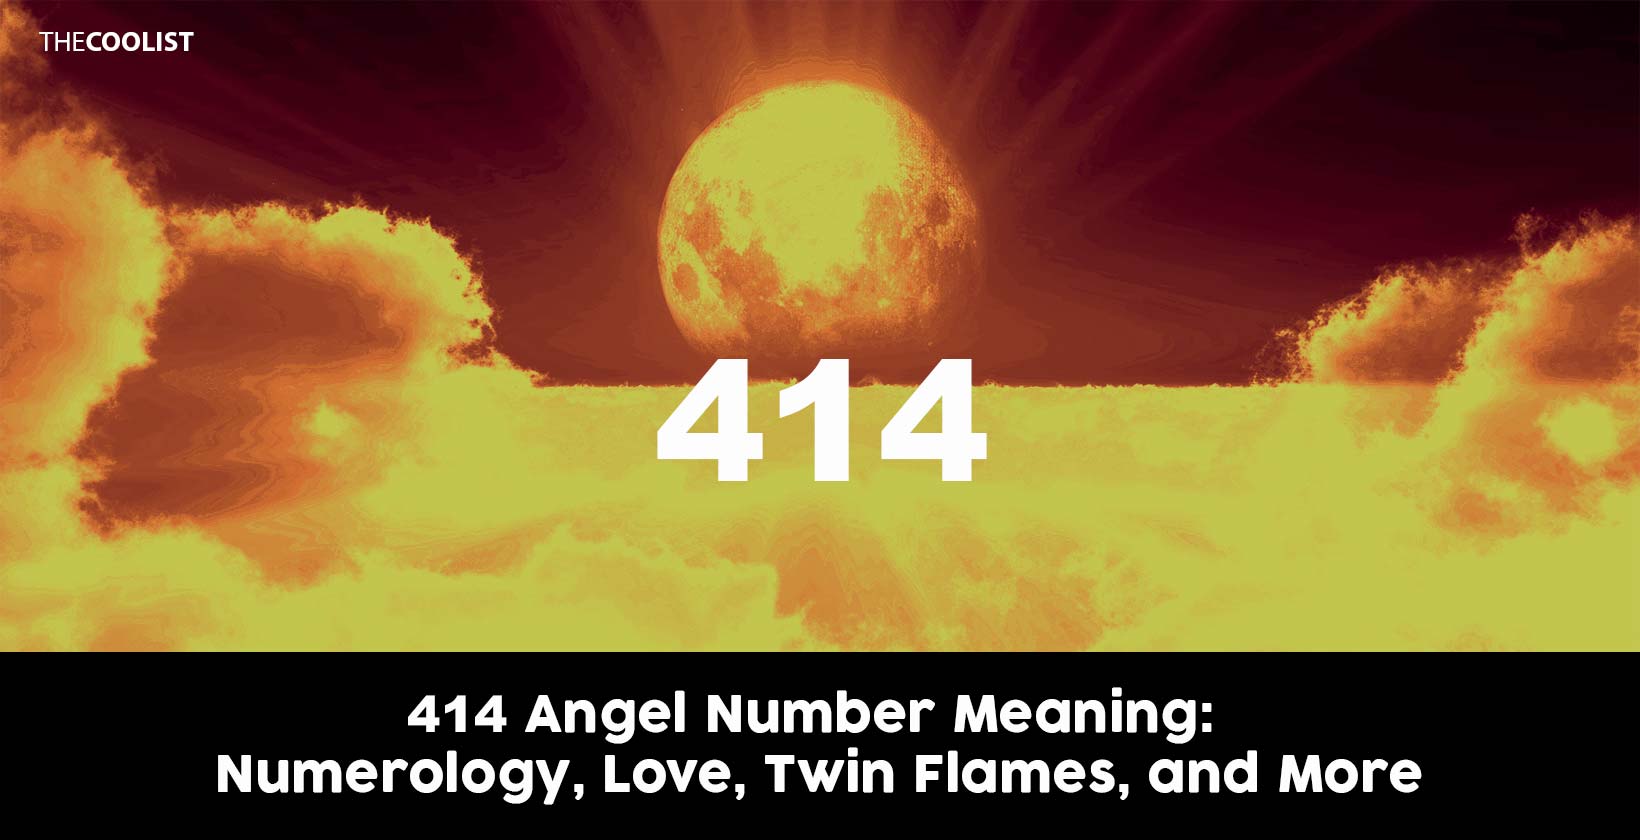 414 Angel Number Meaning: Numerology, Love, Twin Flames, and More